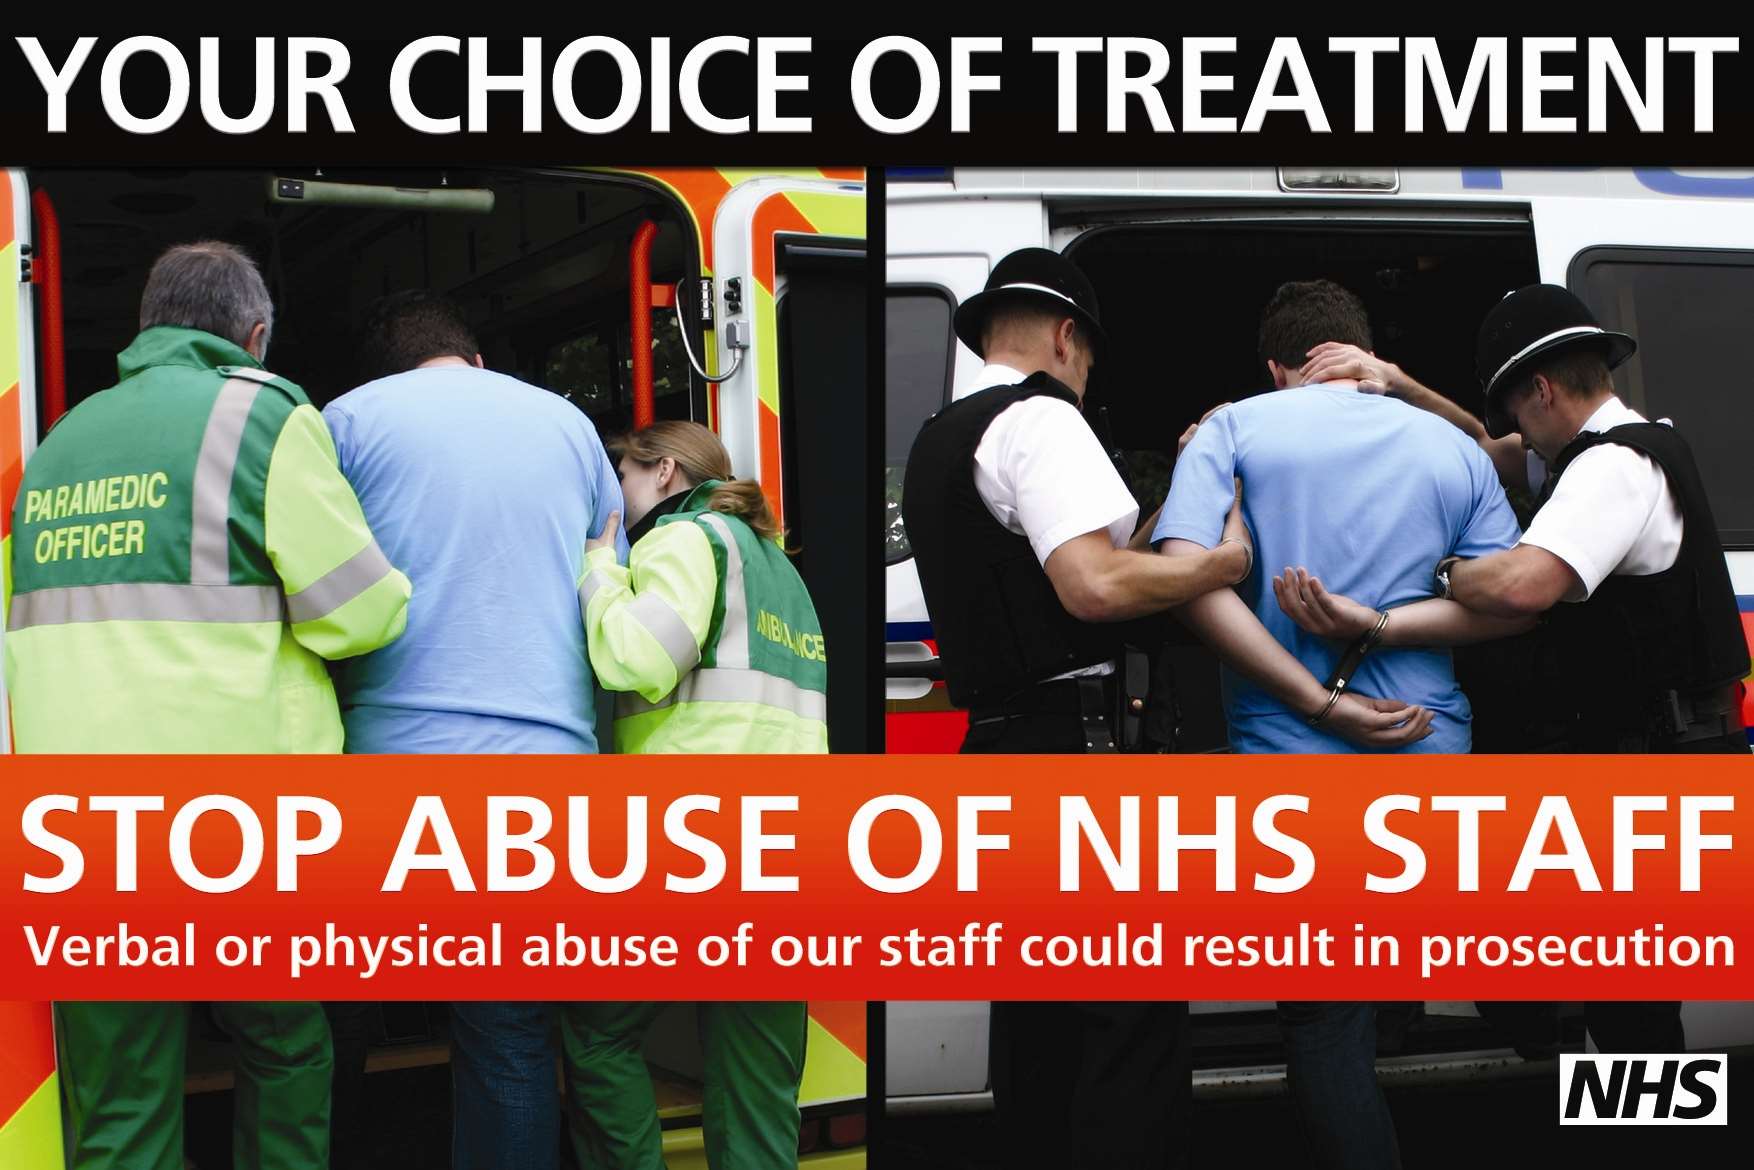 An anti-violence advertisement used by the NHS